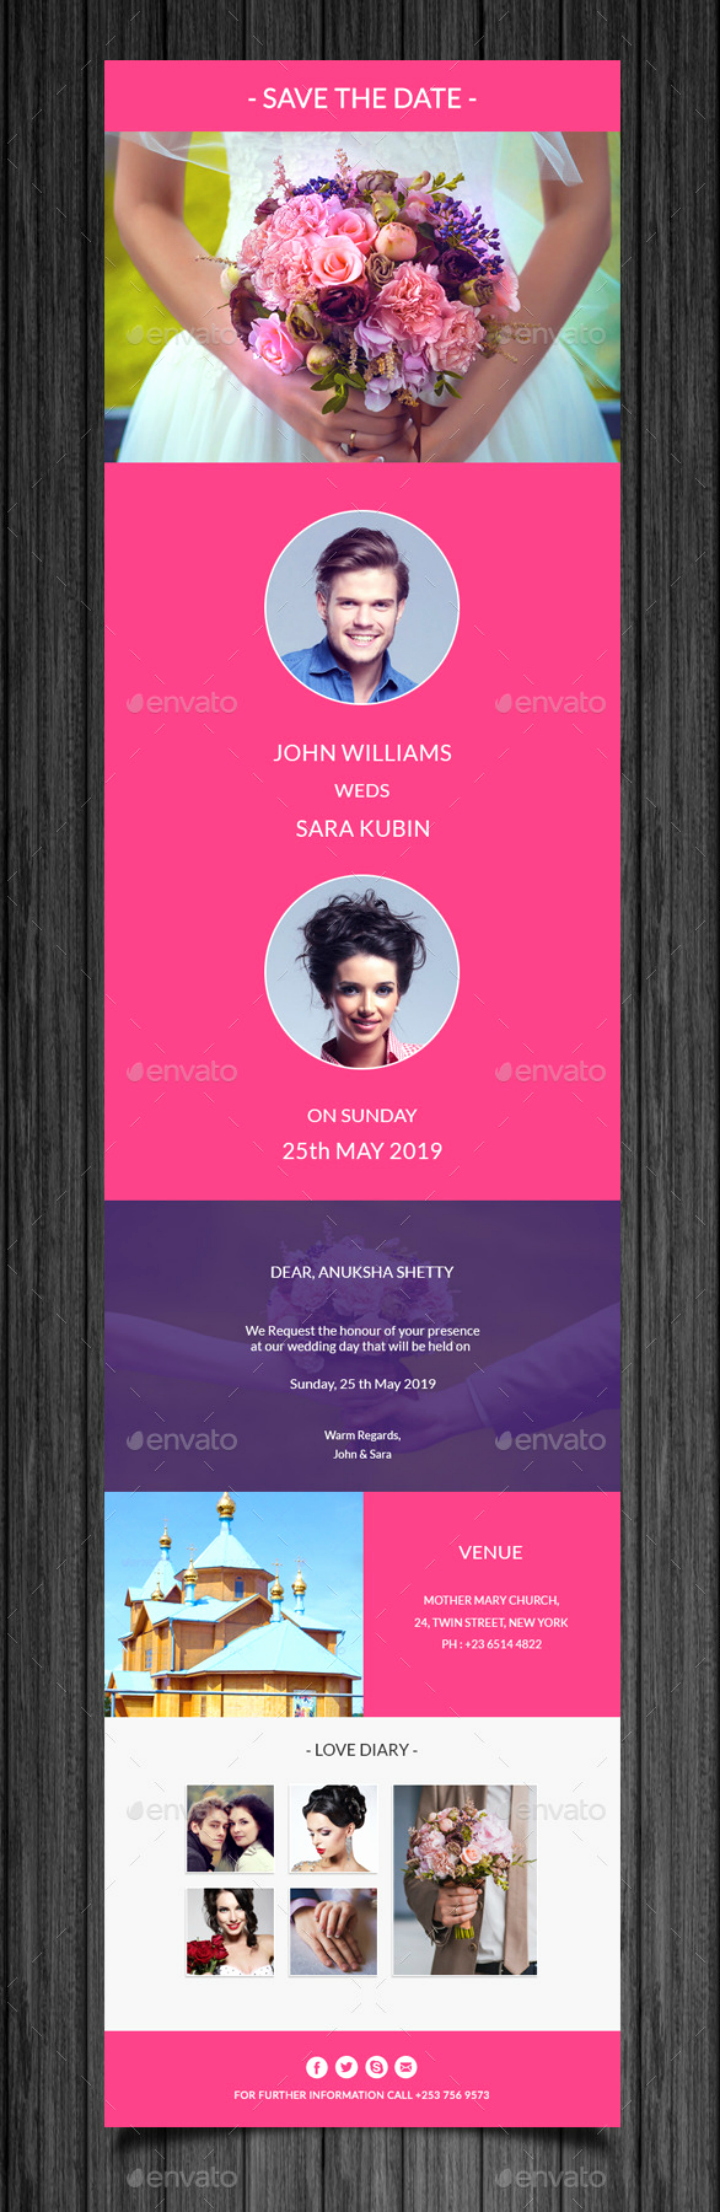 Wedding Invitation Email Template Awesome 14 Wedding Email Designs &amp; Templates Psd Ai